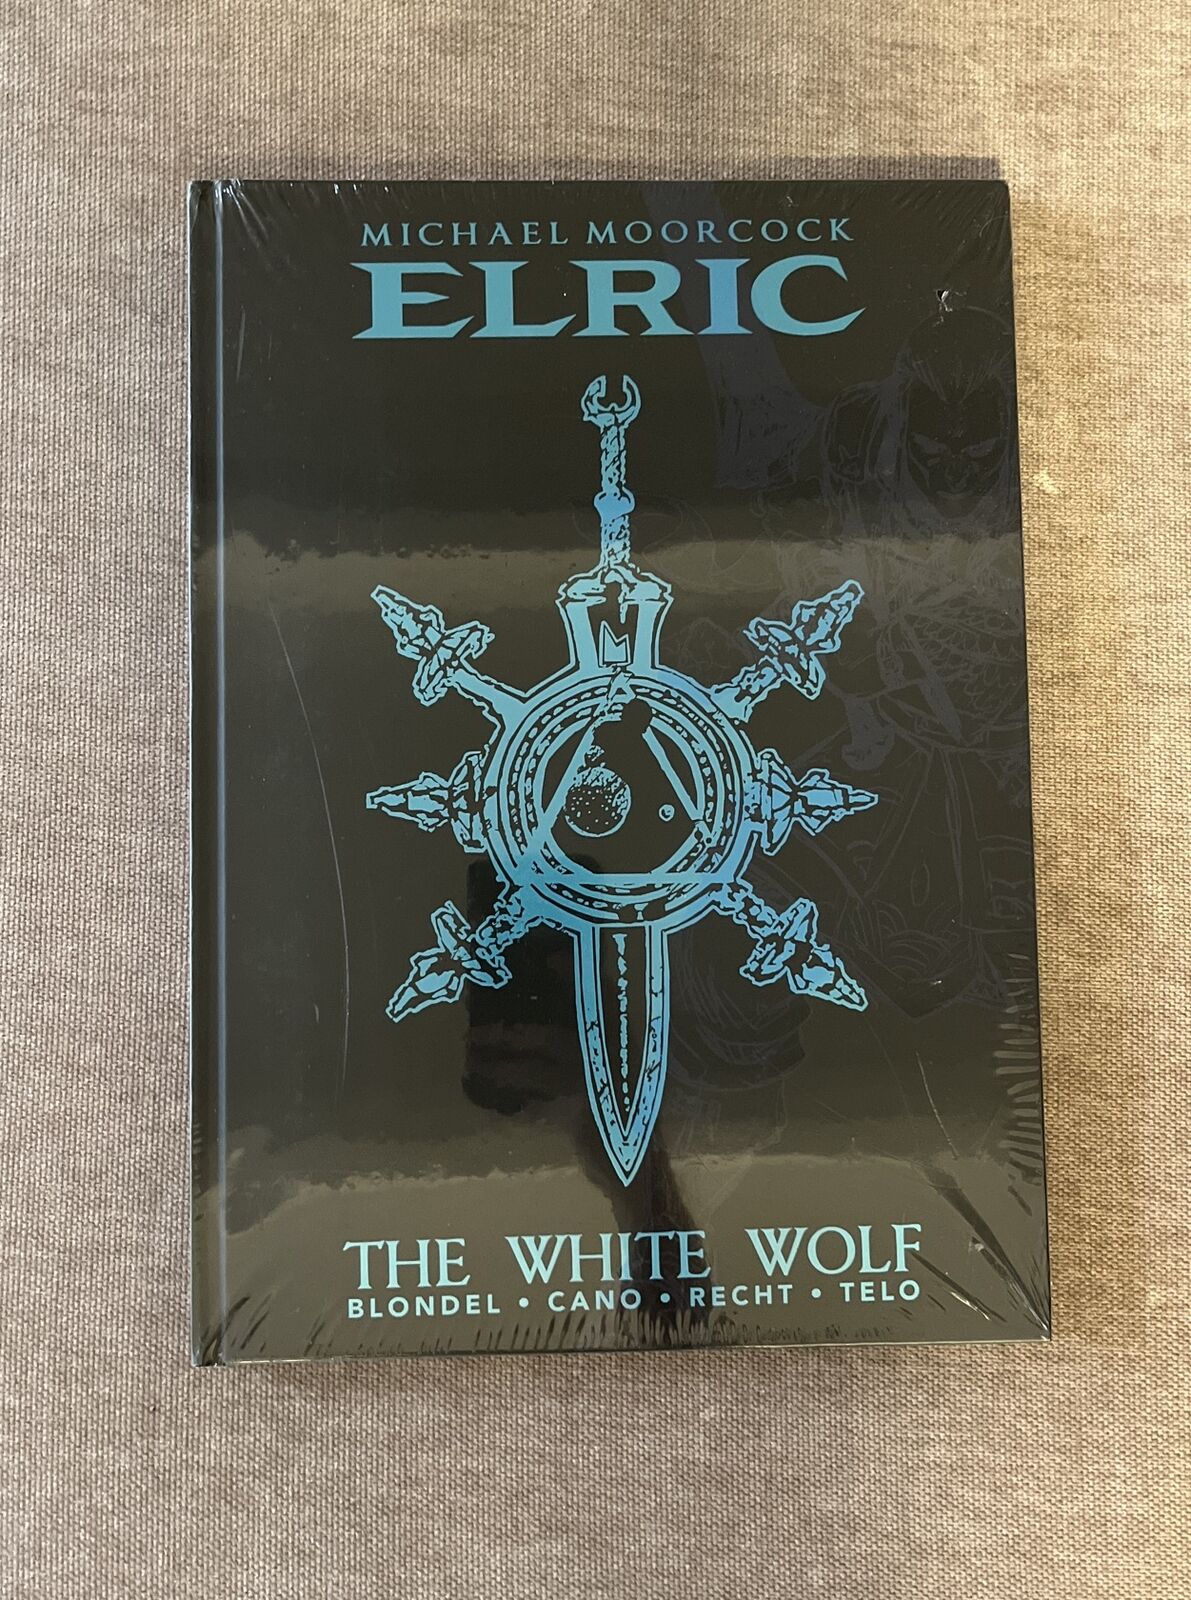 Michael Moorcock\'s Elric Vol. 3: The White Wolf Deluxe Edition - Sealed Mint